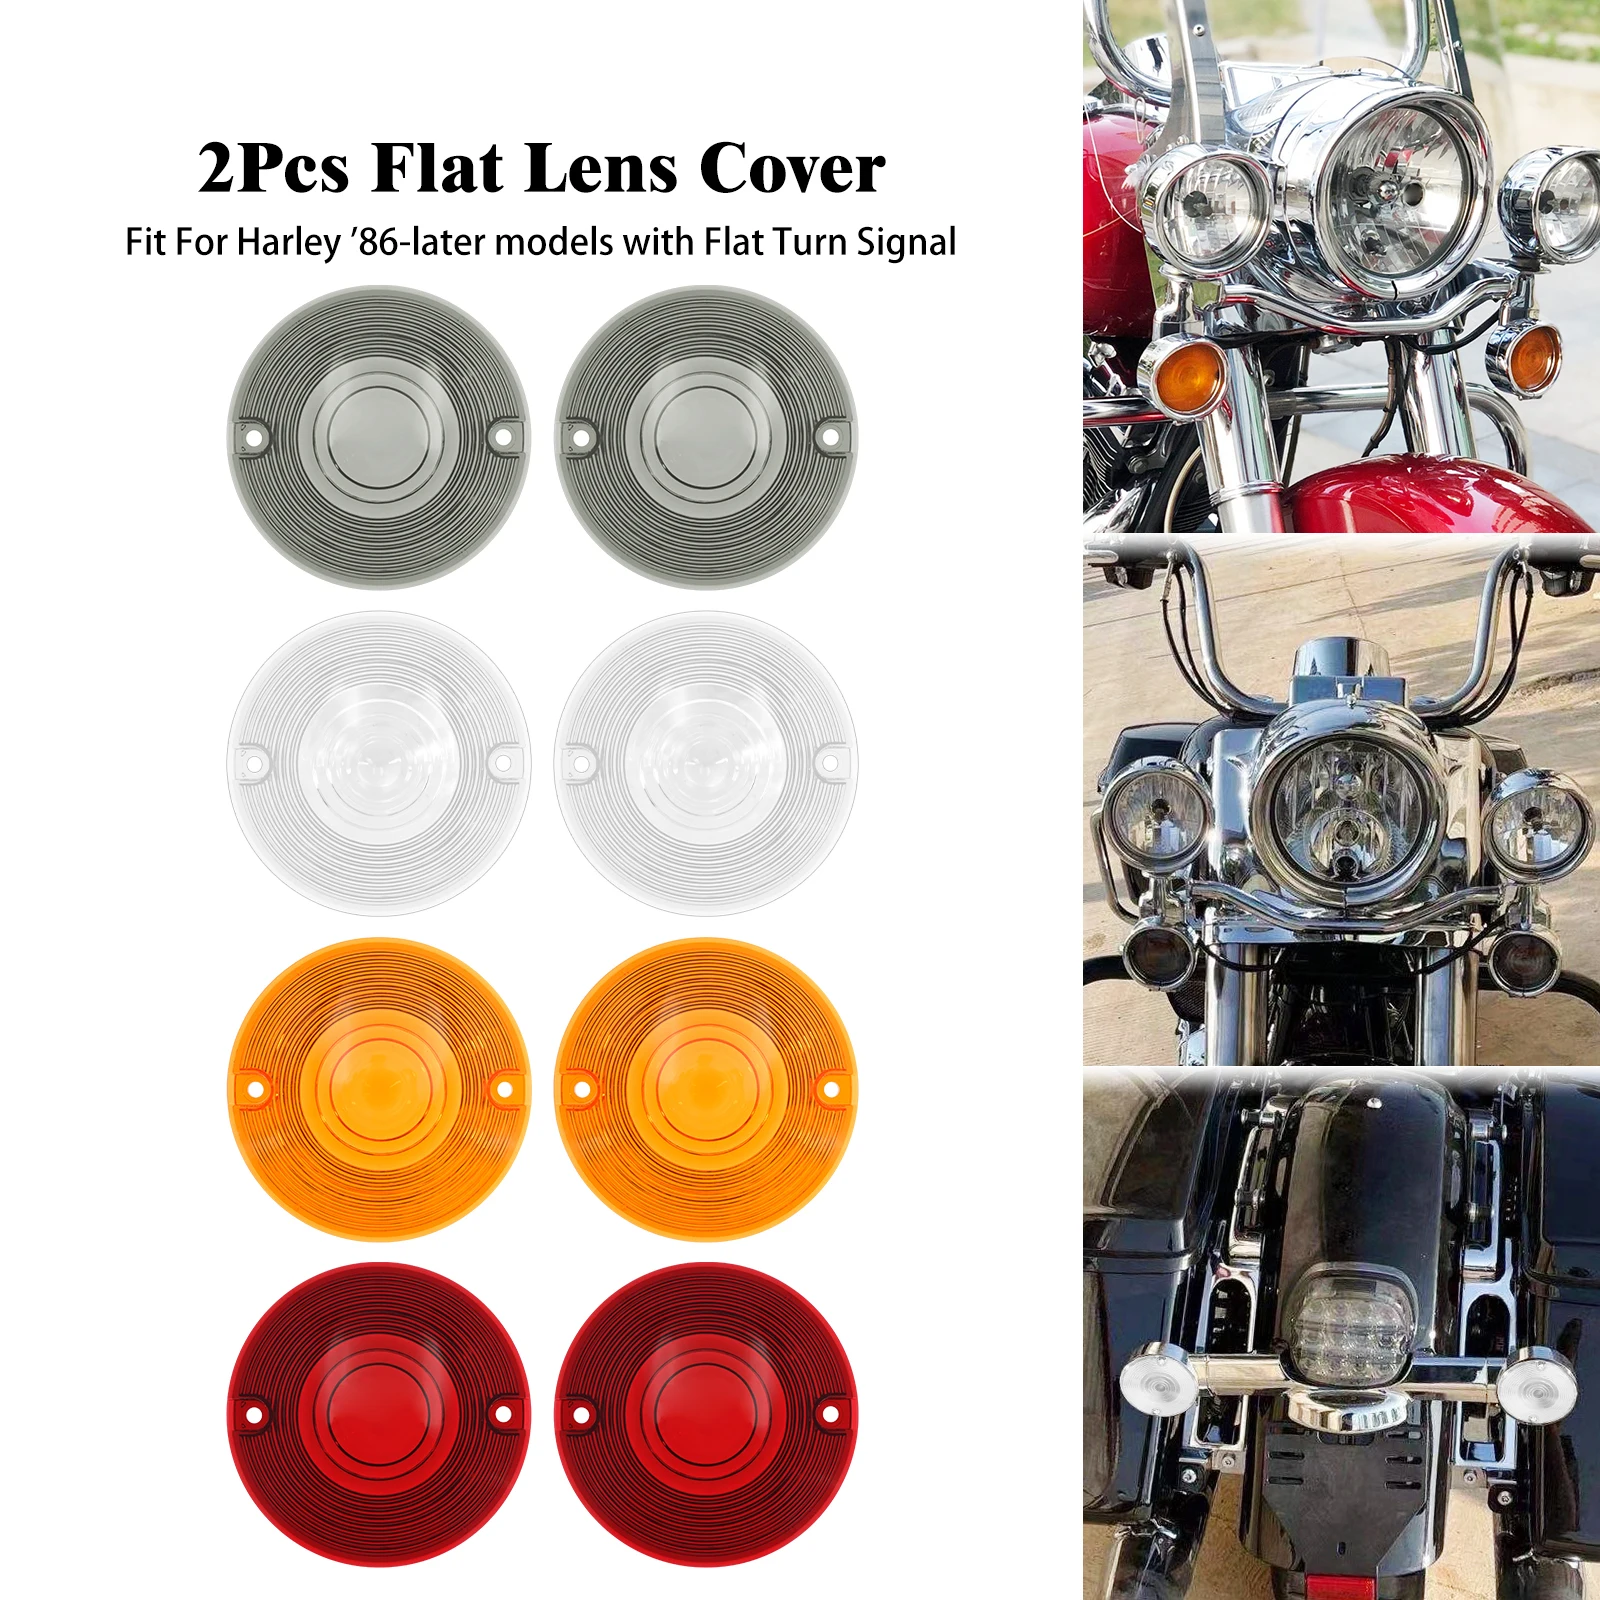 2X Motorcycle Turn Signal Flat Lens Cover For Harley Touring  Road King Street Glide Tour Electra Glide Softail Heritage 1986-23